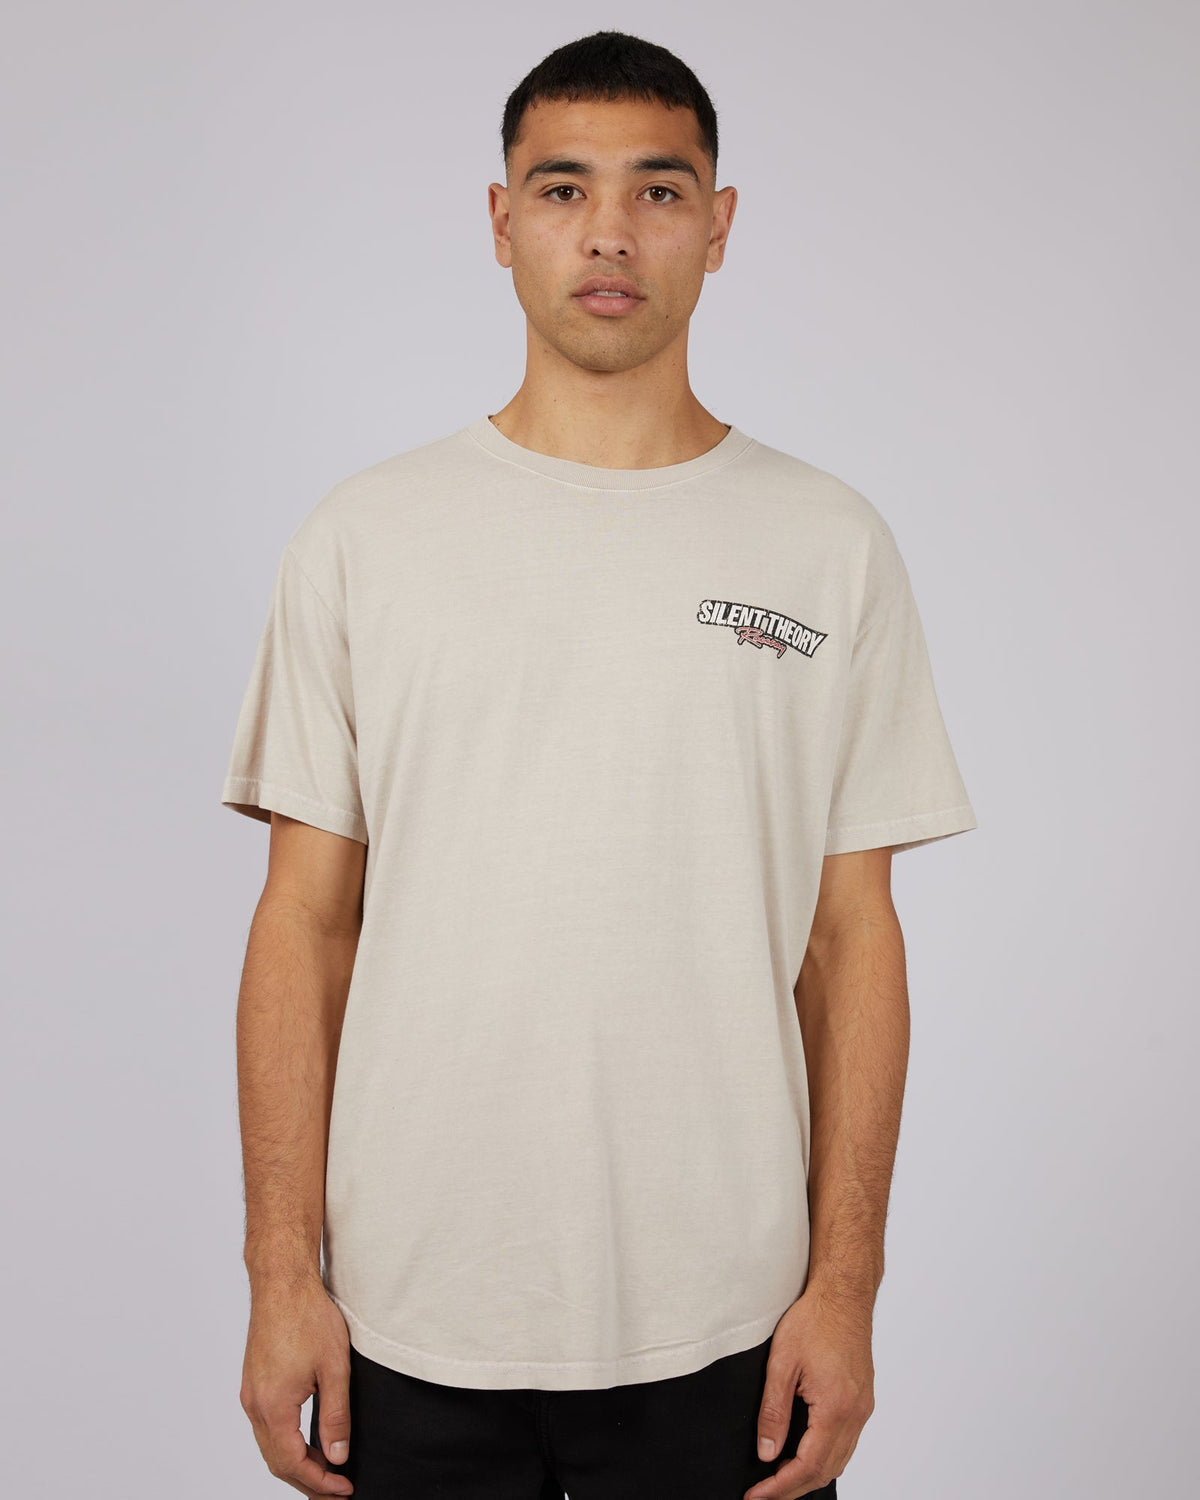 Silent Theory-Track Scoop Tee Stone-Edge Clothing